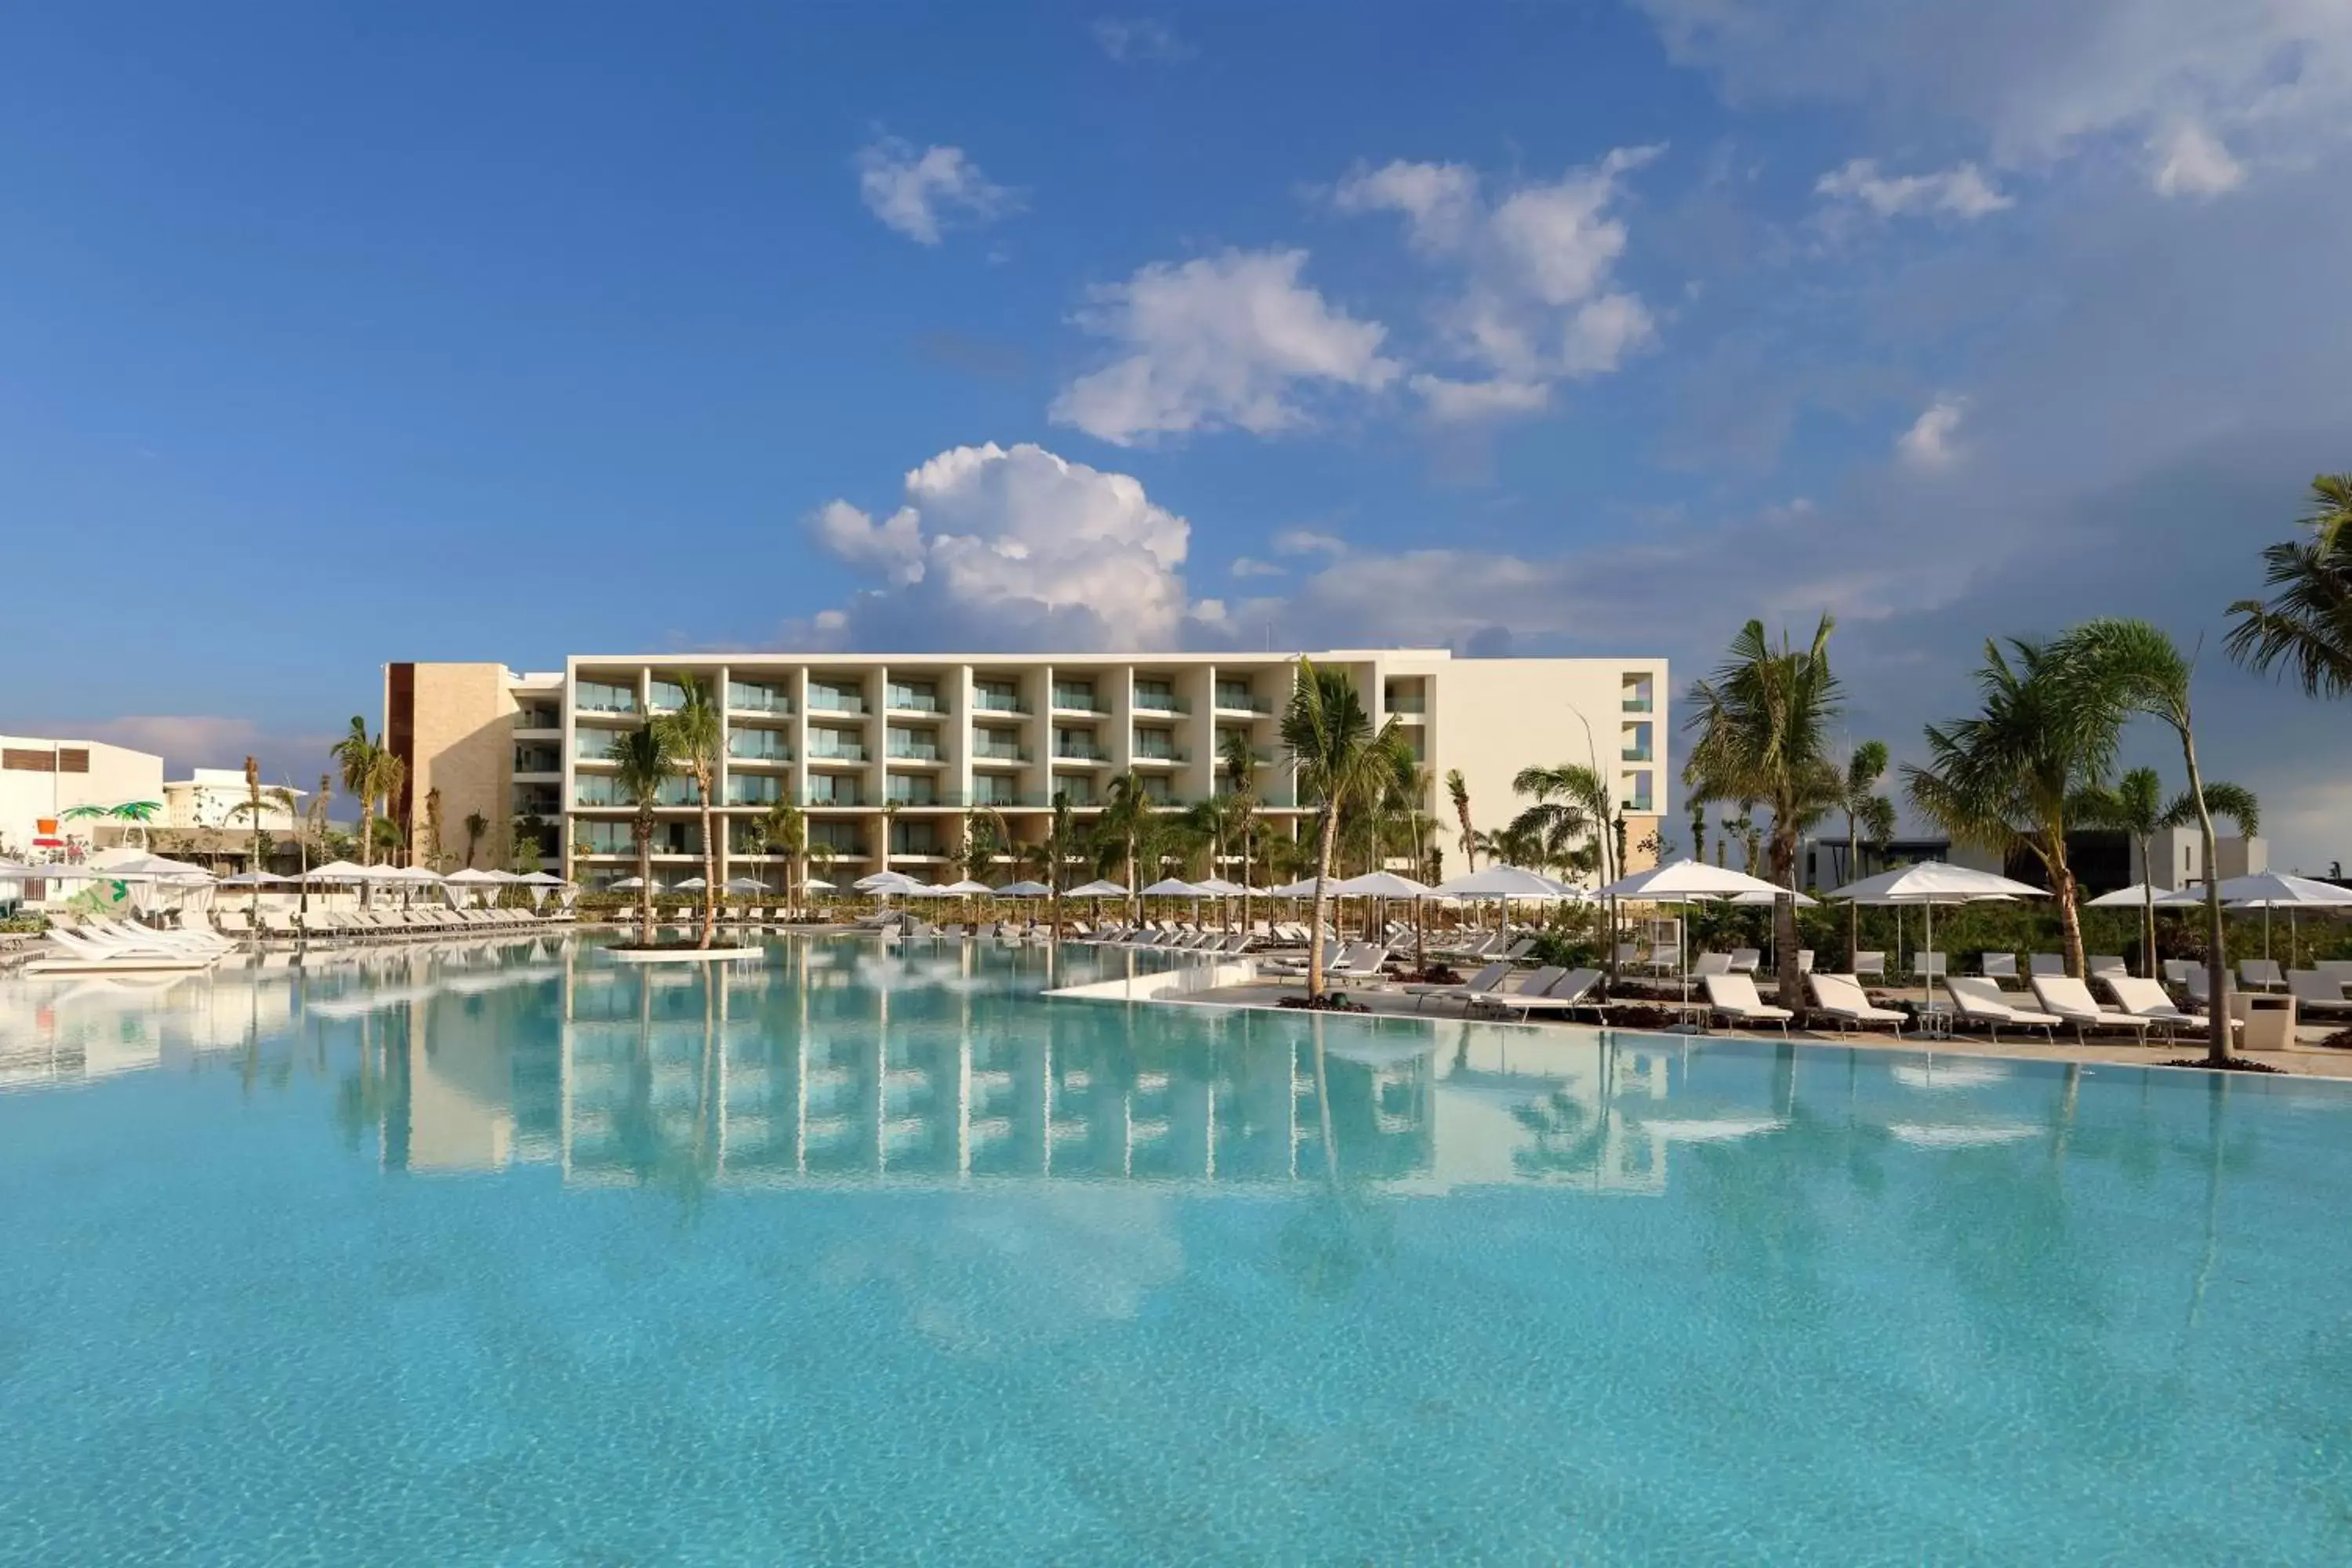 Property building, Swimming Pool in Family Selection at Grand Palladium Costa Mujeres Resort & Spa - All Inclusive